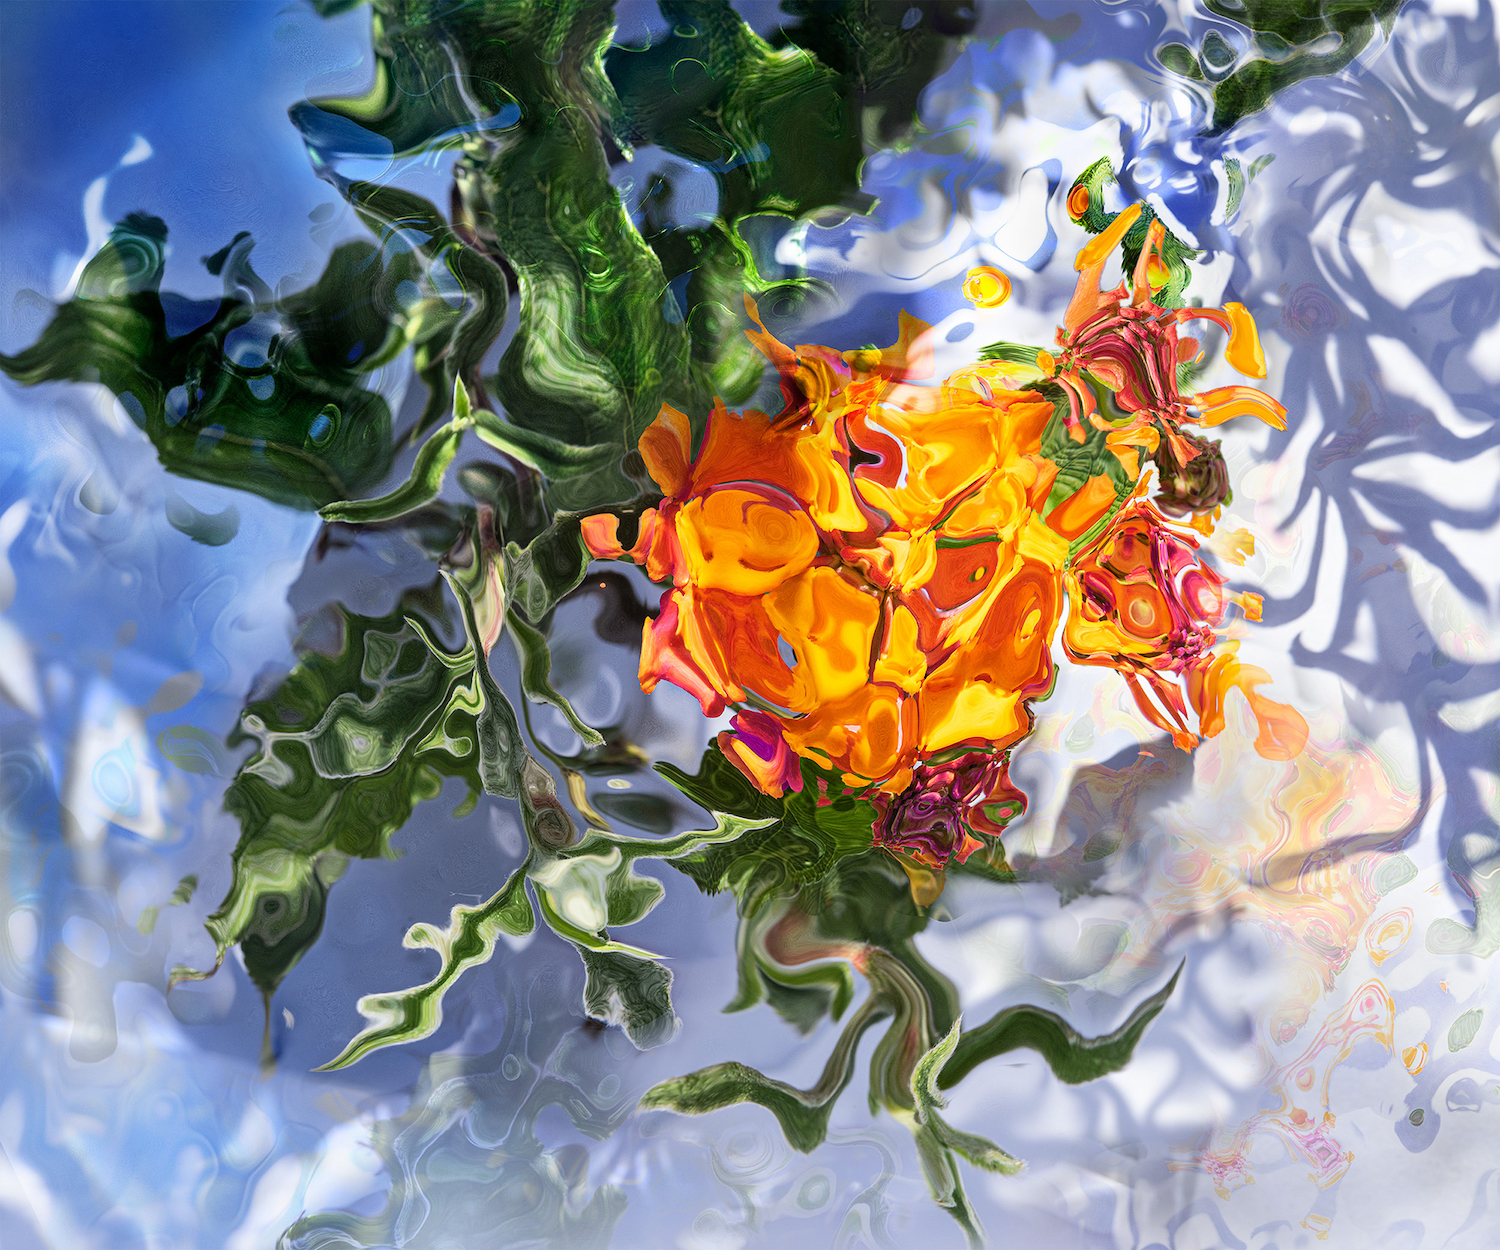 abstract image with green, orange, blue and other metallic colors